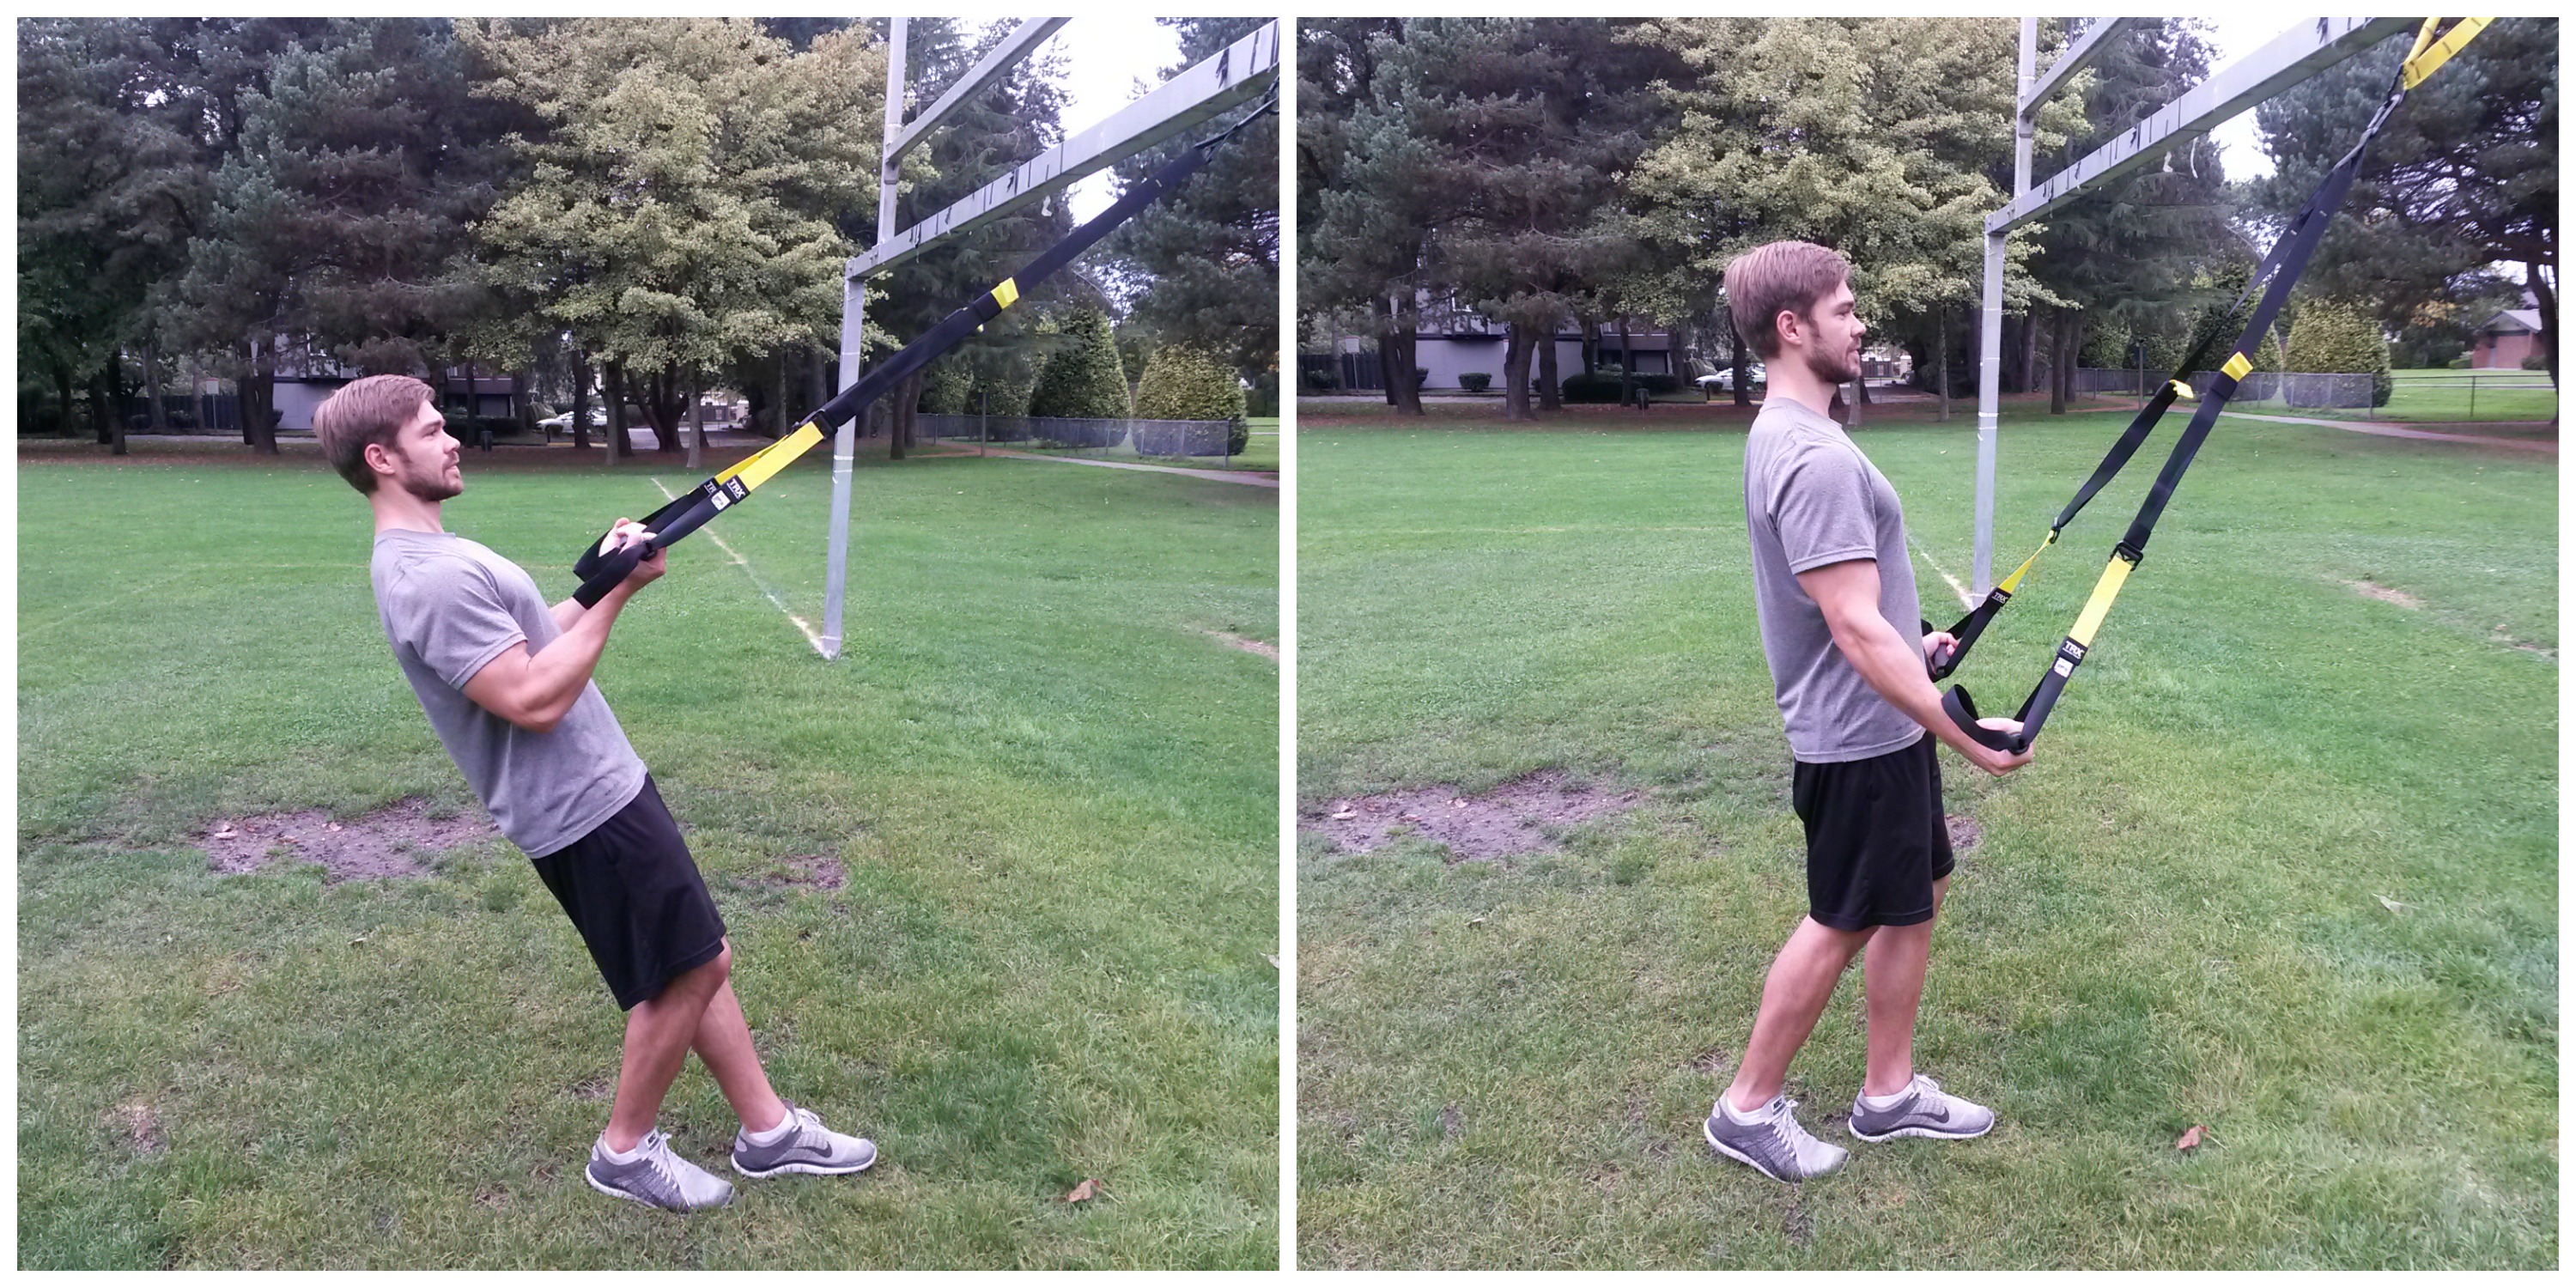 Two TRX Tricep Exercises to Tone the Back of Your Arms